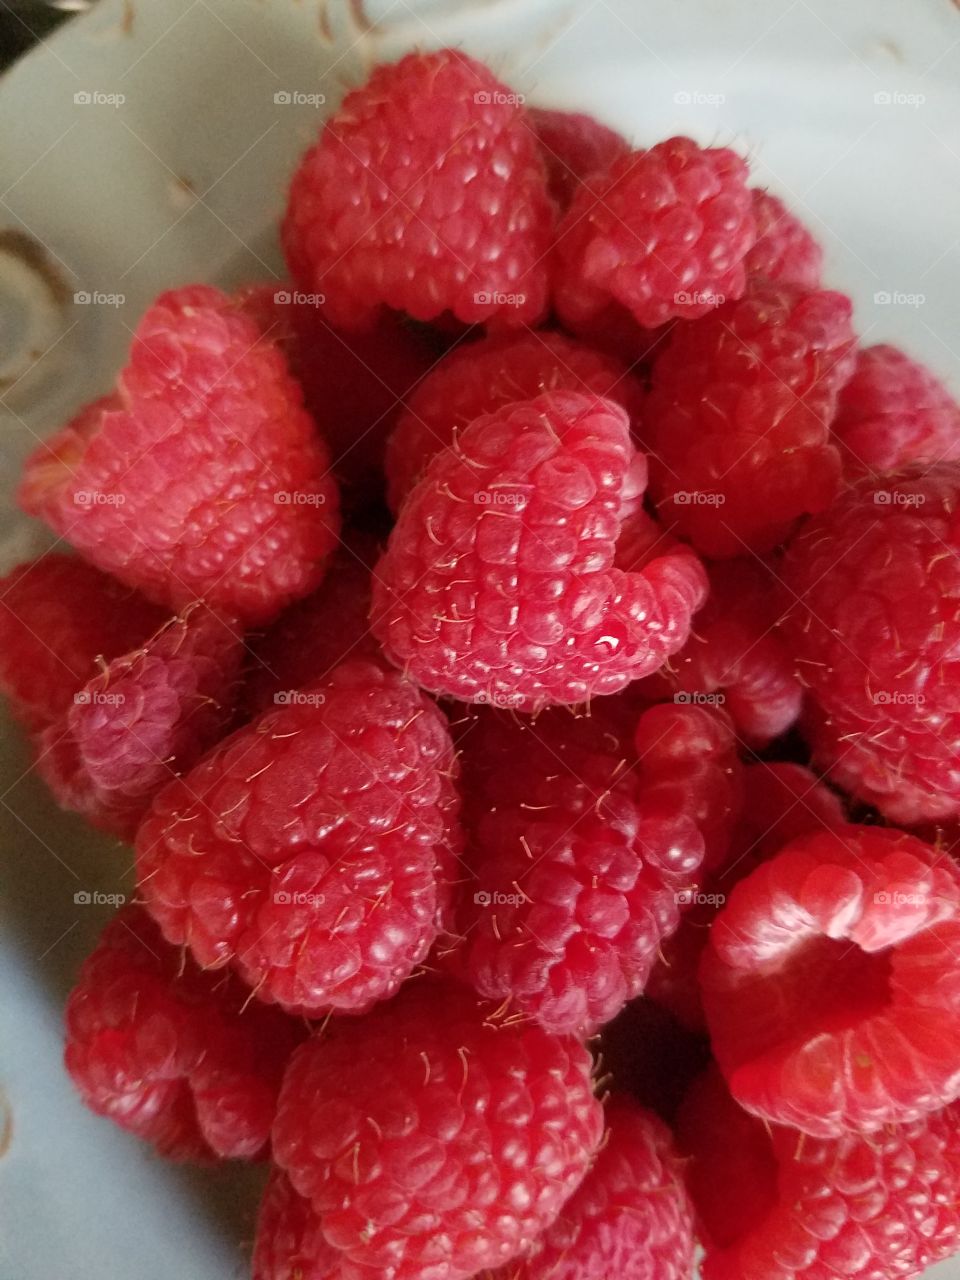 raspberry, red, fresh, healthy, close-up